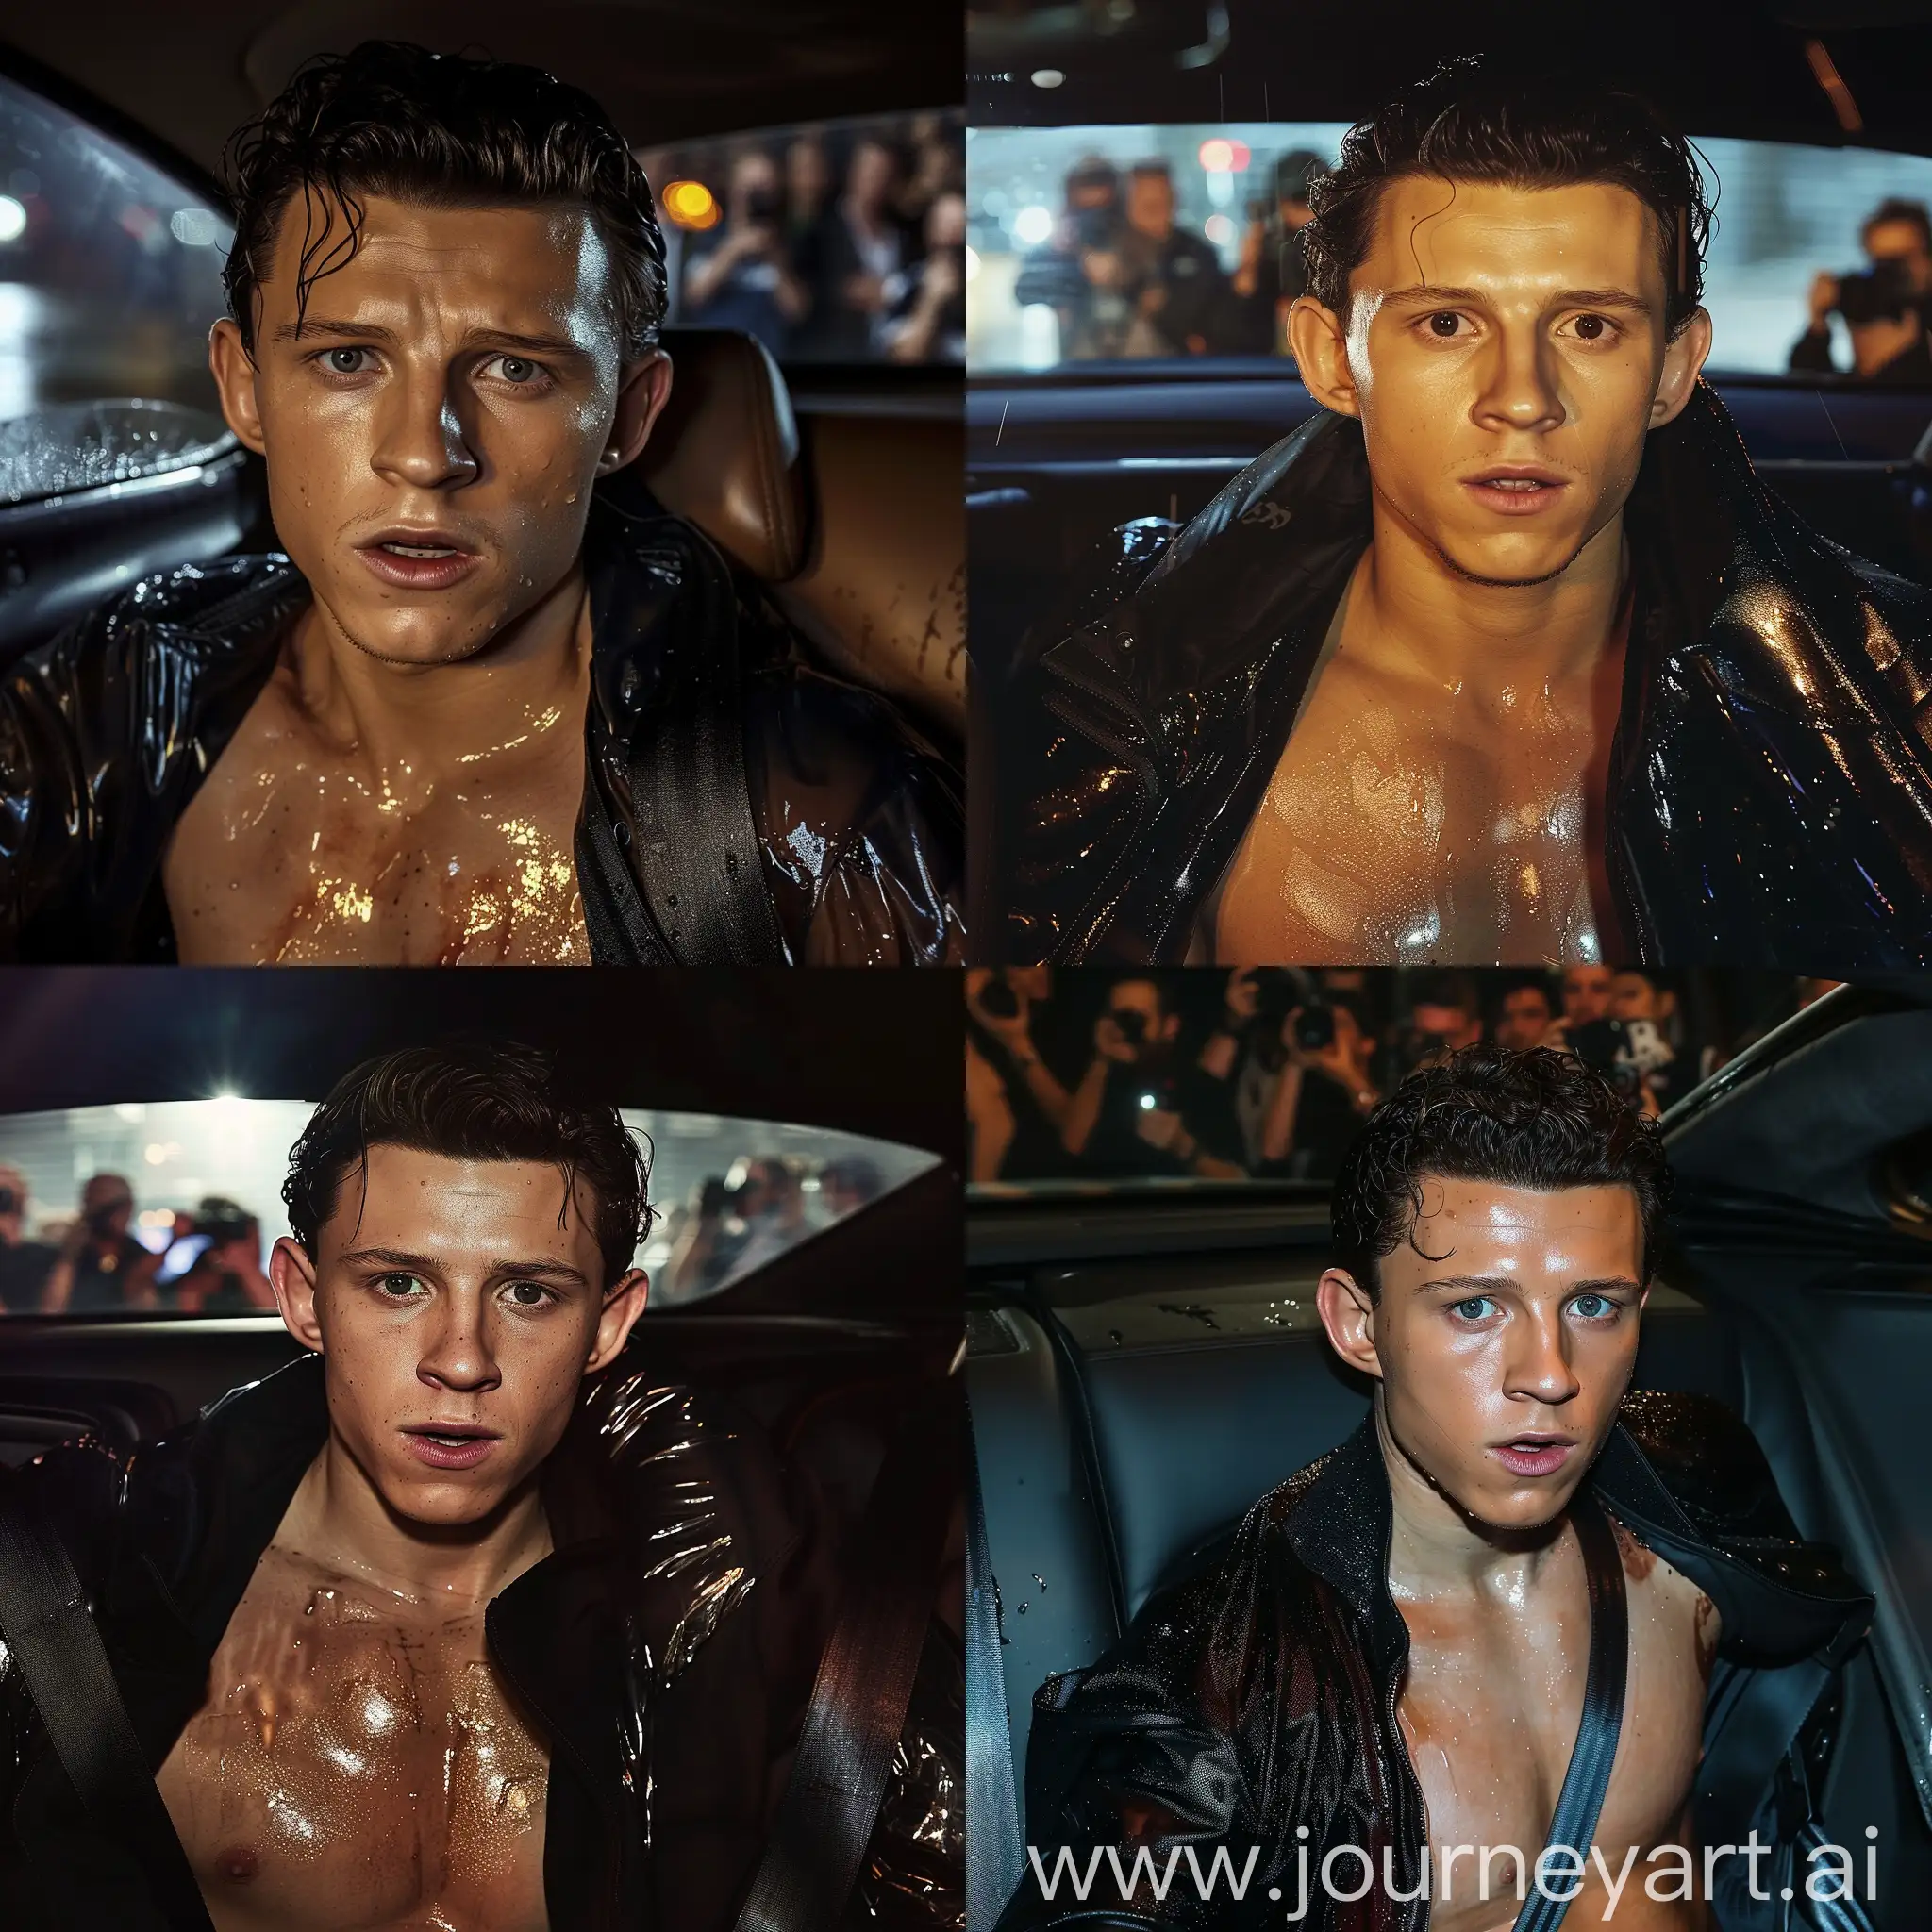 Tom-Holland-Looking-Dapper-in-Car-Scene-with-Low-Lighting